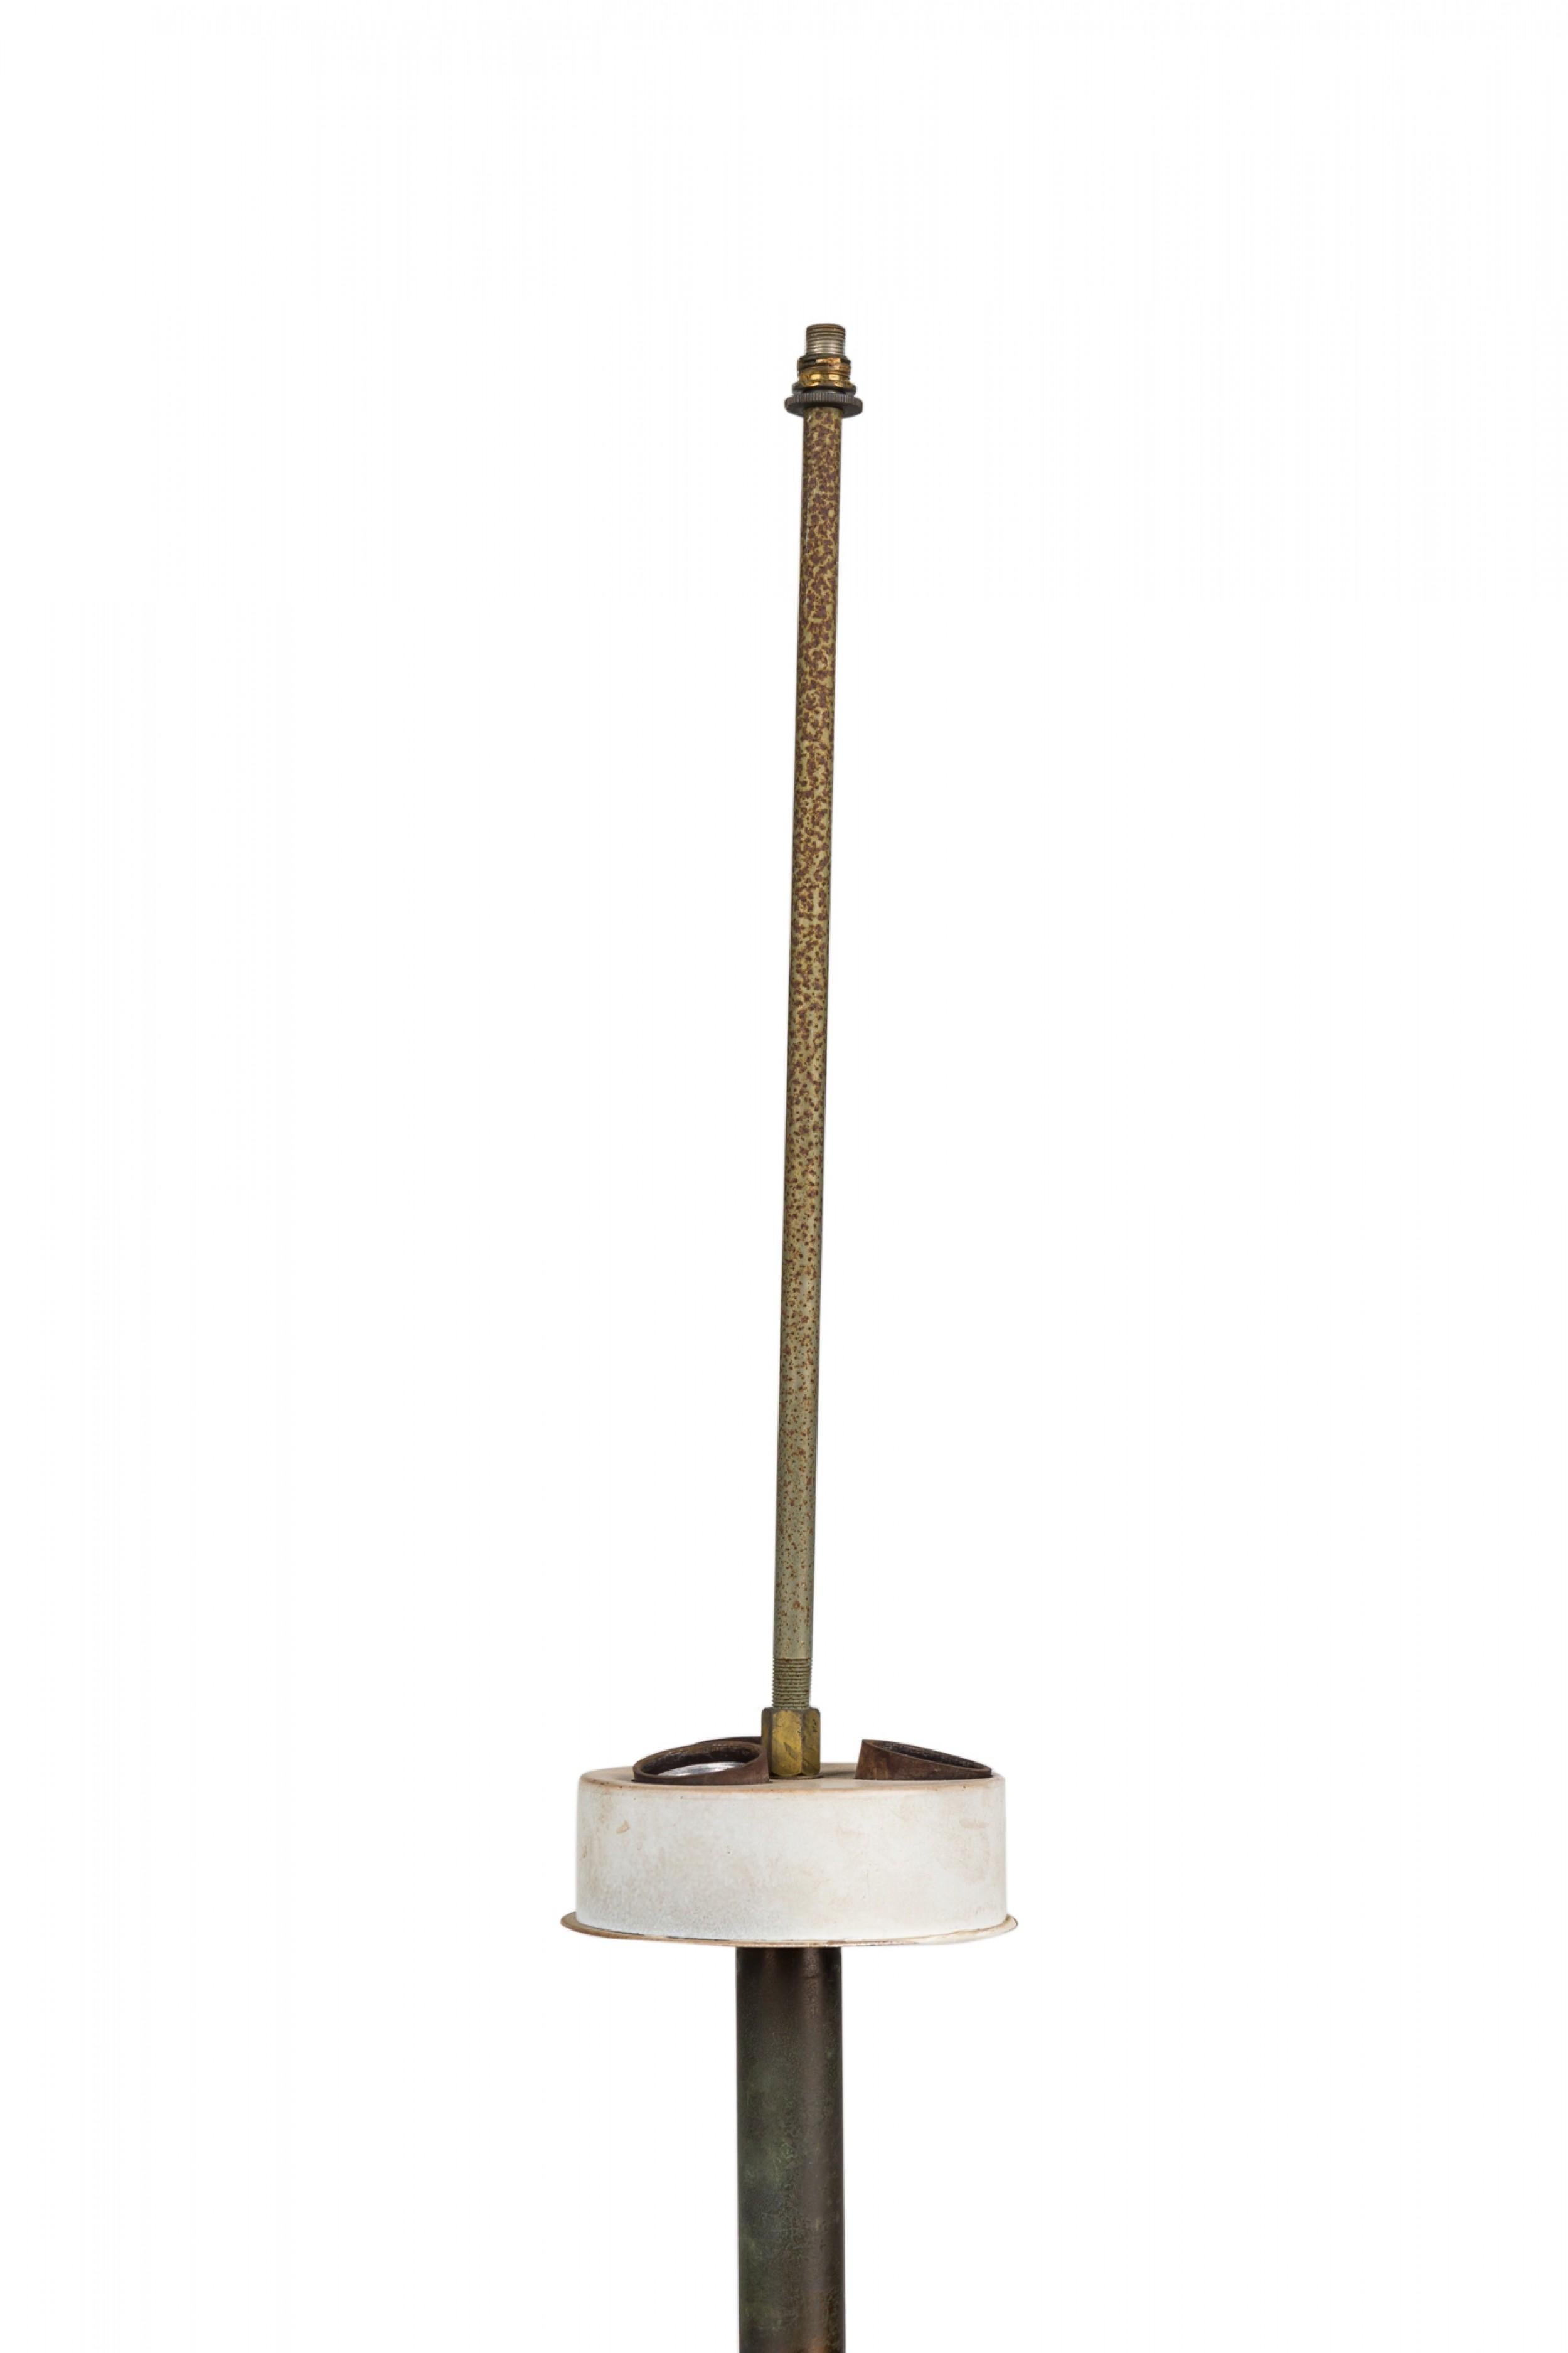 Mid-Century Italian ceramic urn repurposed as a table lamp in footed ovoid form with cylindrical neck topped by a ceramic banded sphere finial and a circular 3-way nonfunctioning white light switch socket, the body glazed in glossy white, decorated